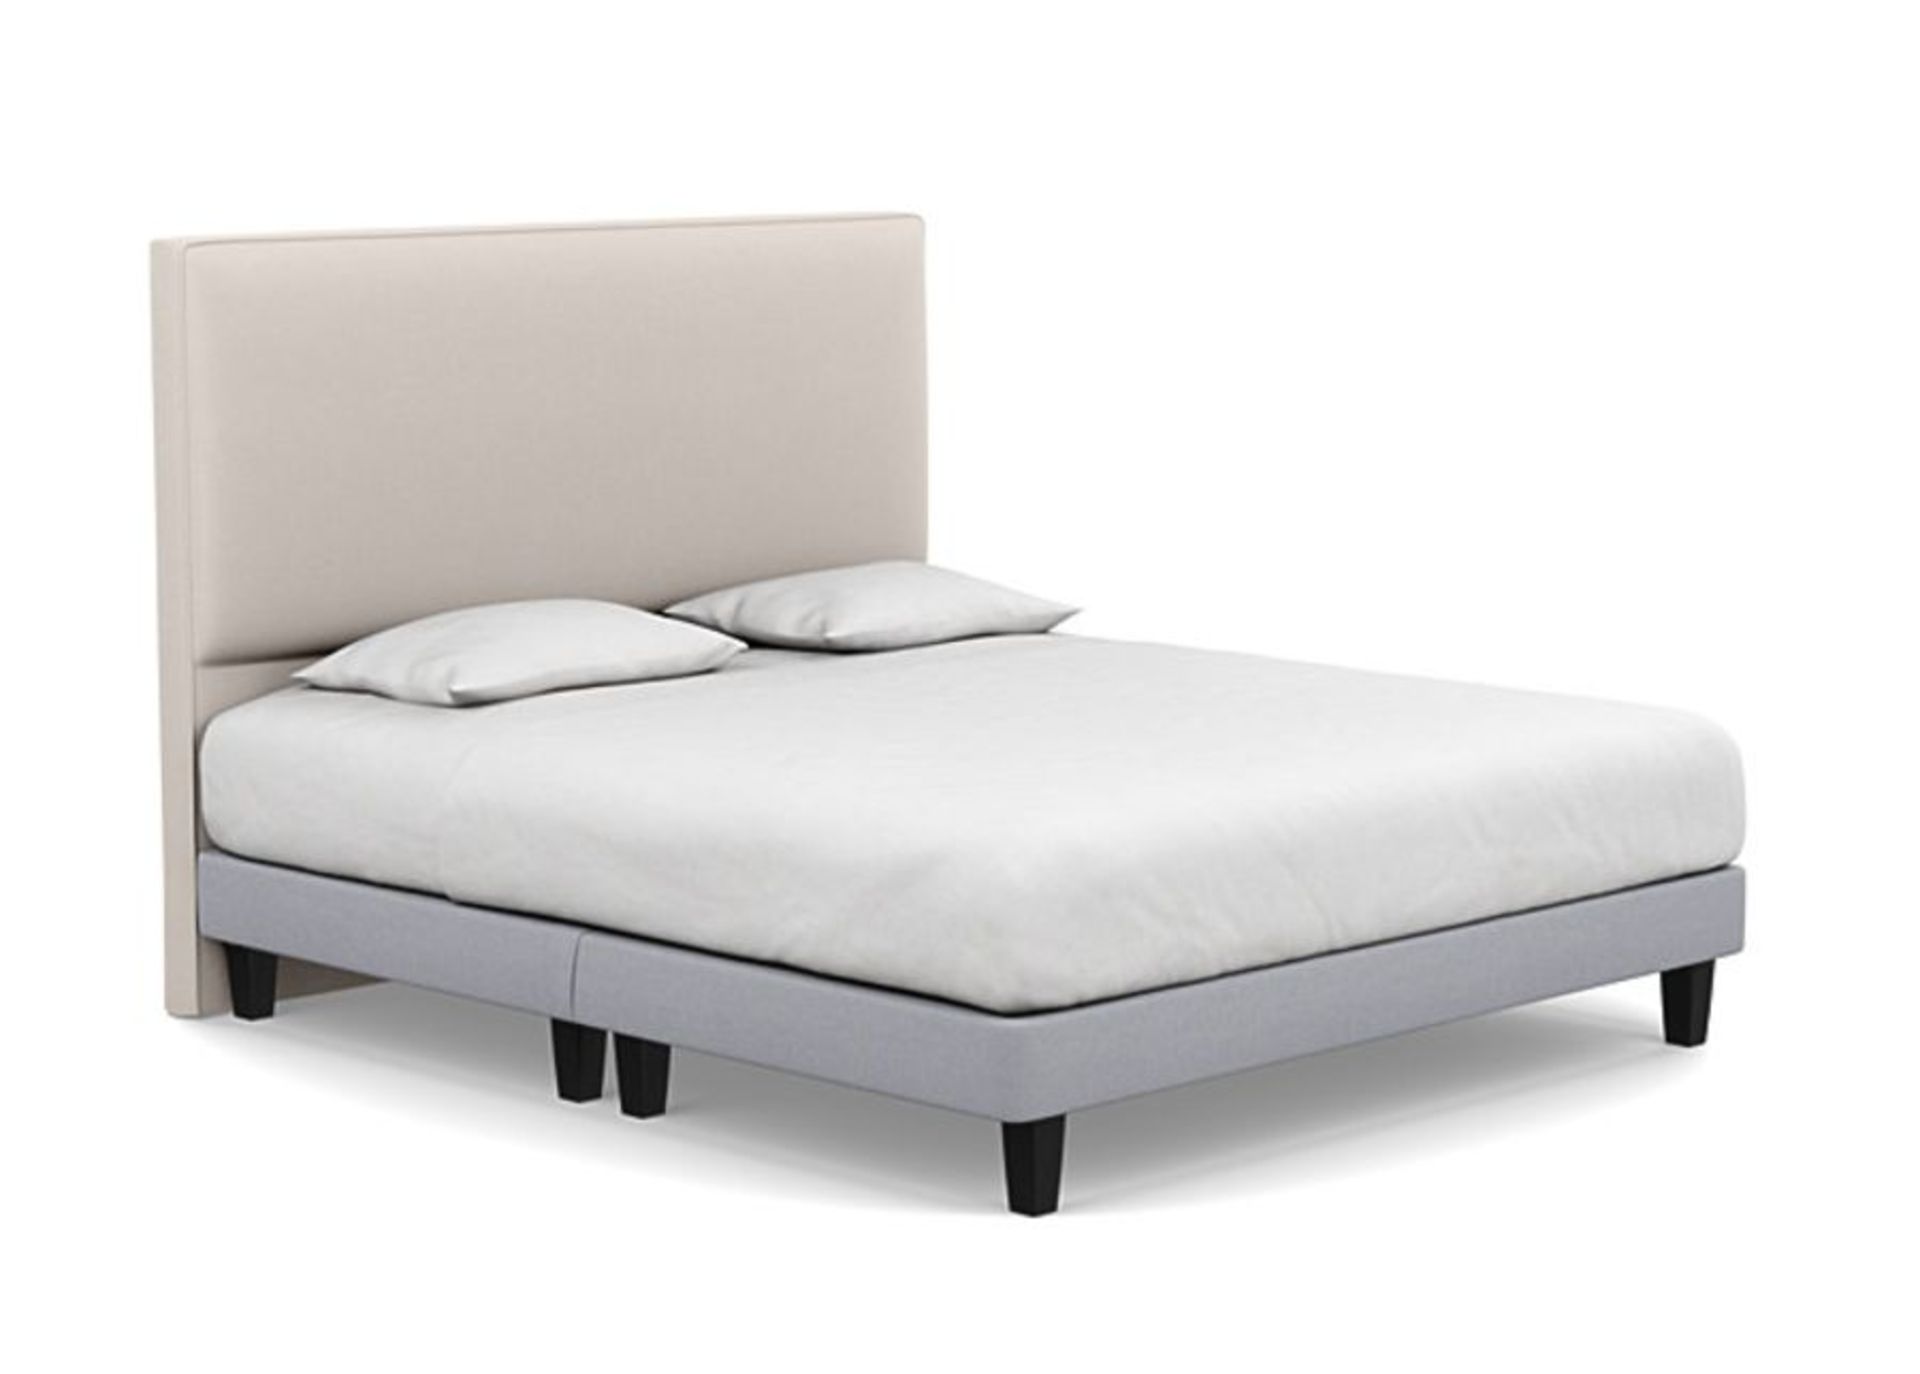 Heals Heal's Shallow Divan Super King Pewter and Cream Cotton Dark Solid Wood RRP ?1059.00 Heal's - Image 4 of 7